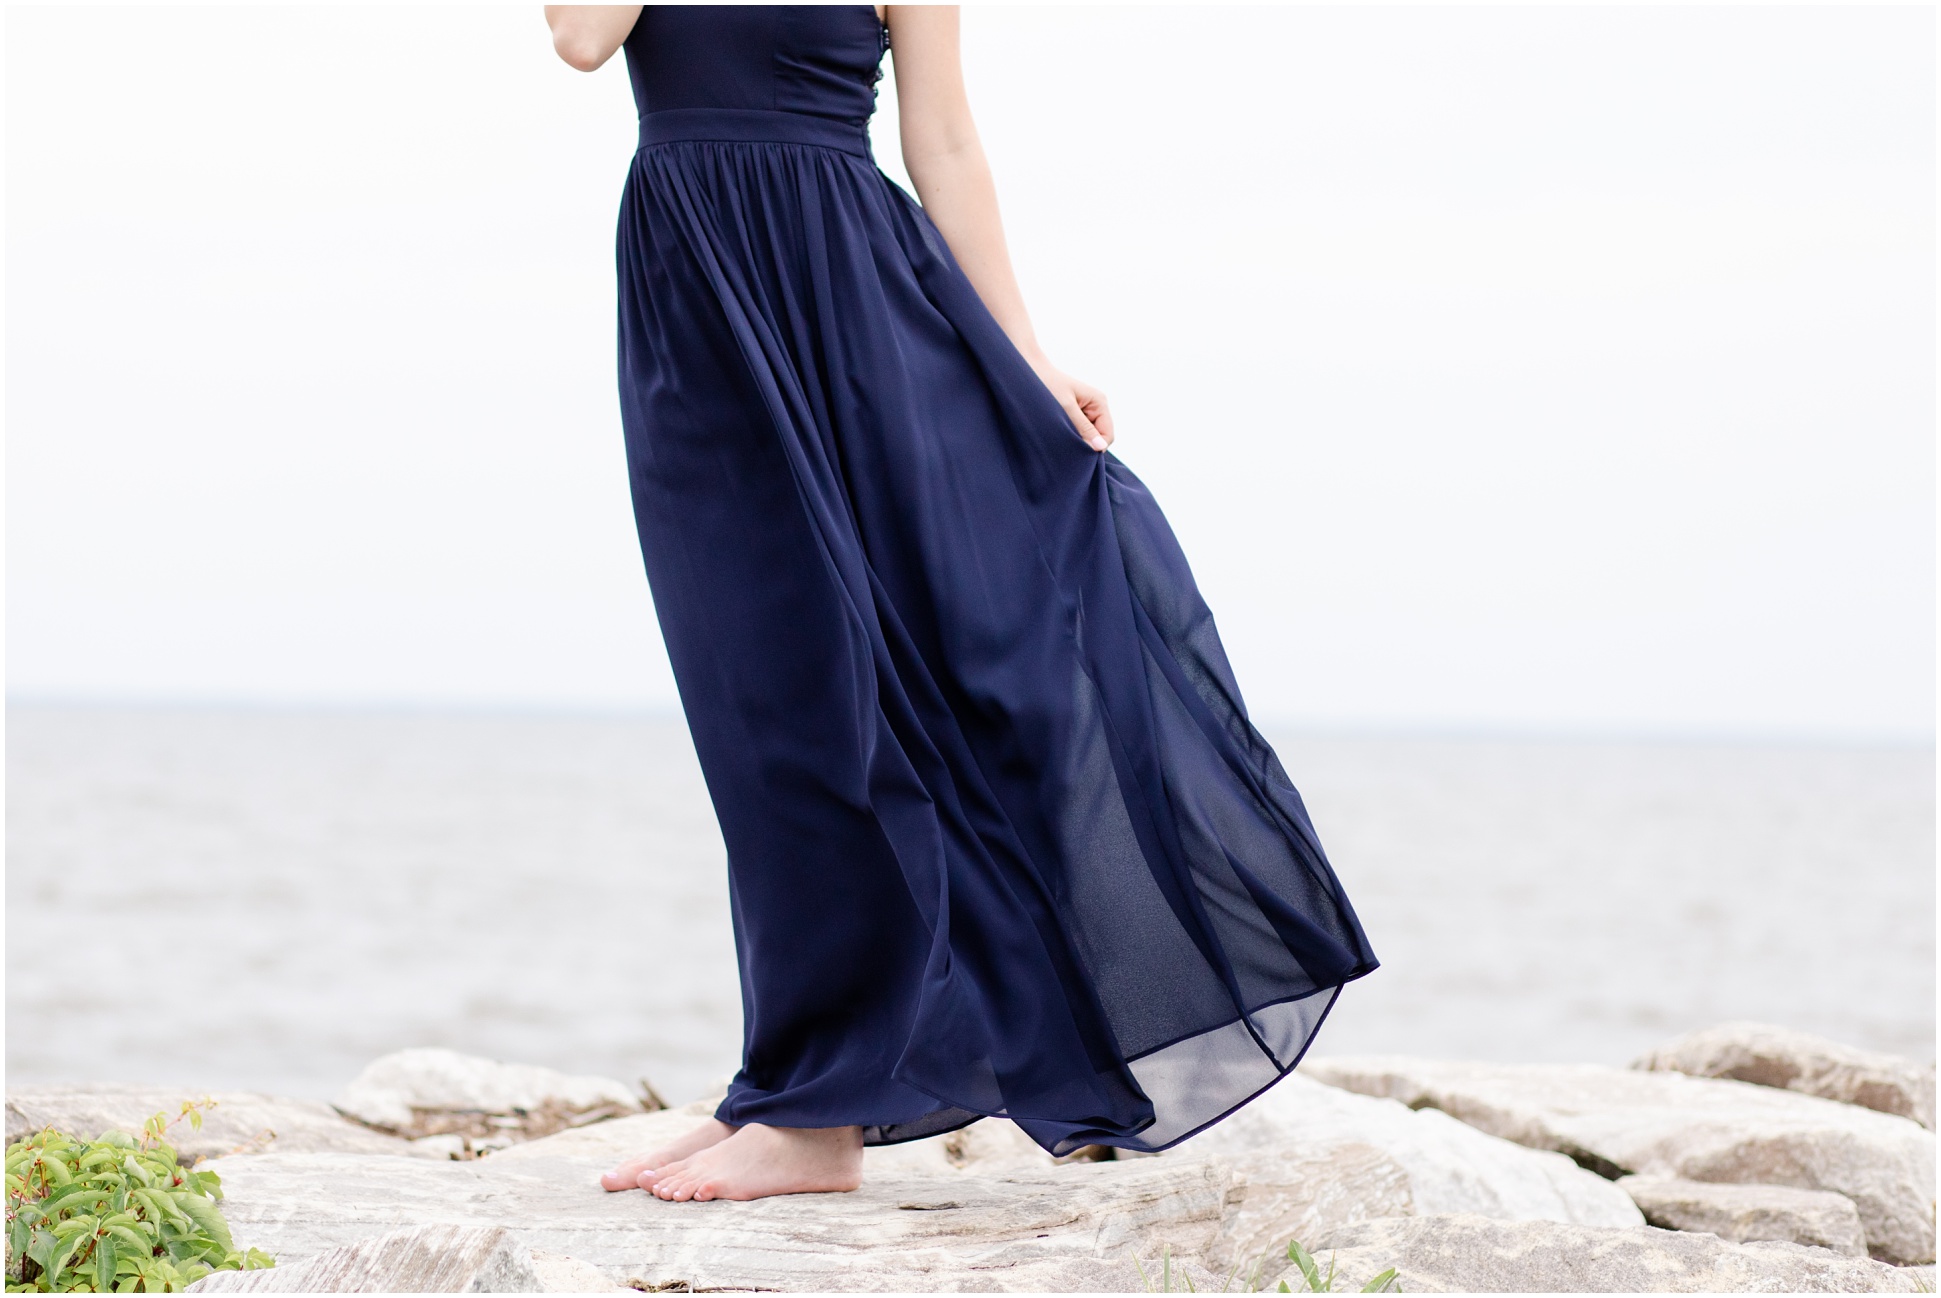 Navy Blue Dress Blowing in the wind